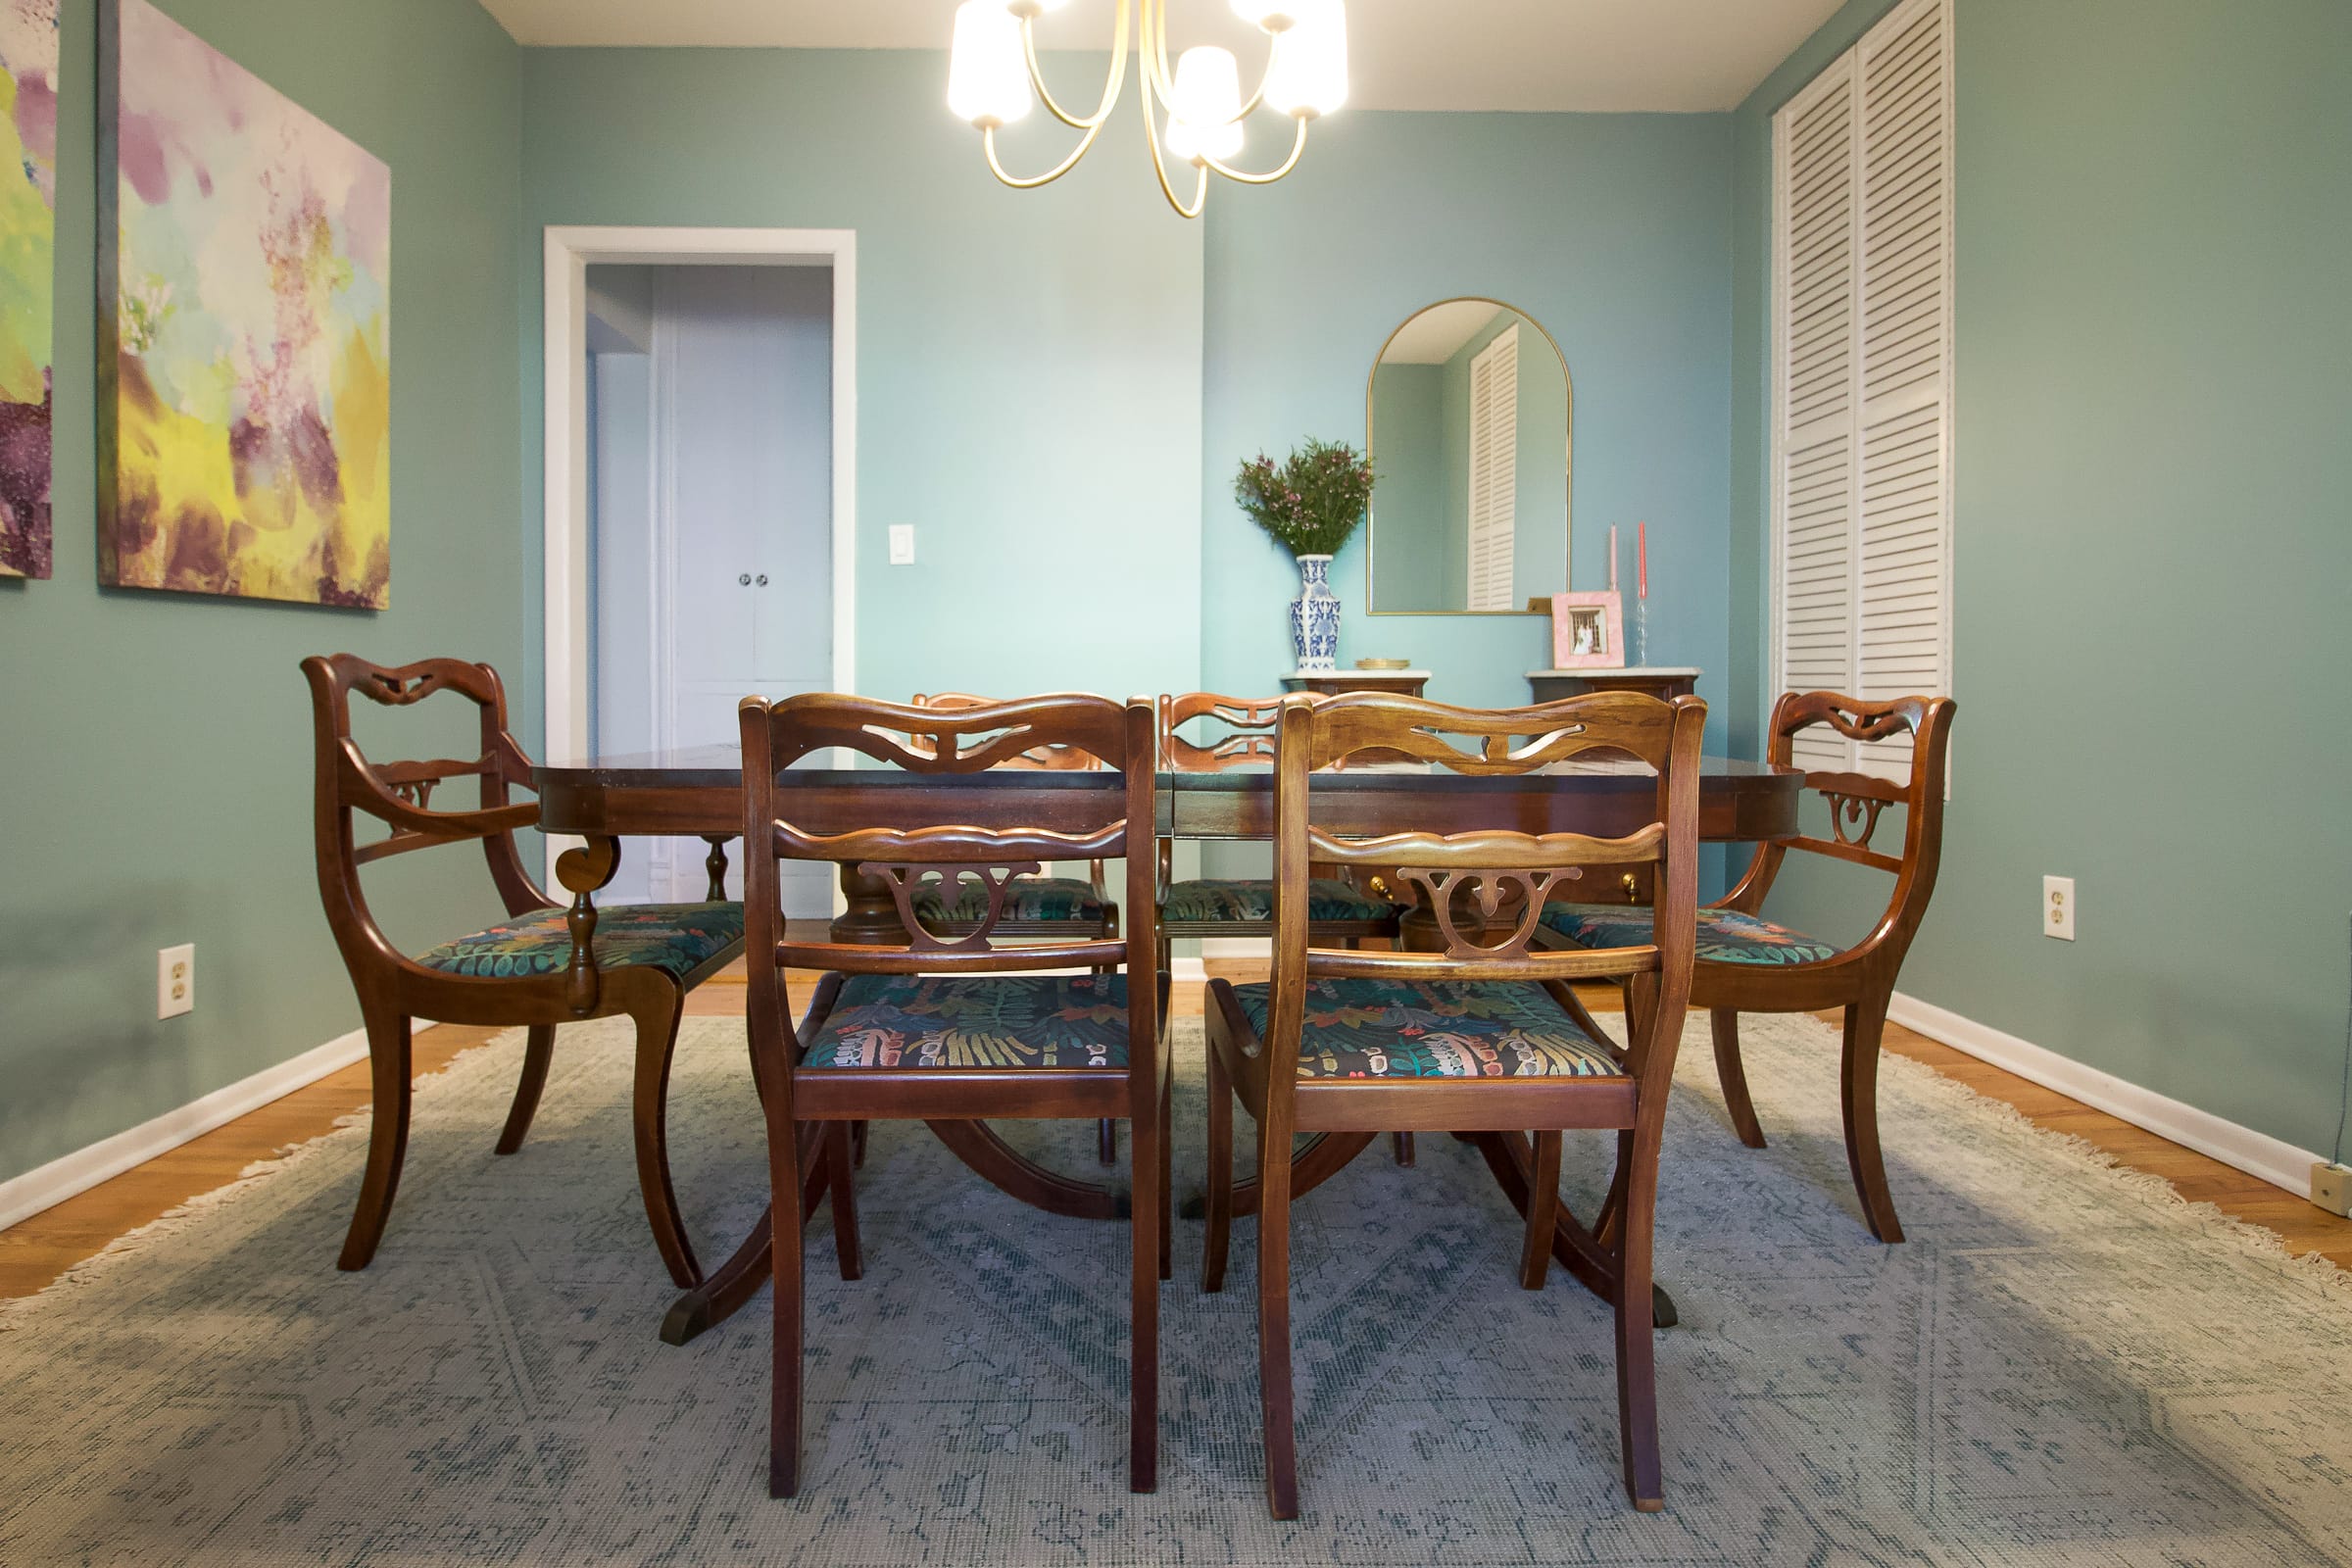 The dining room space in this charming condo